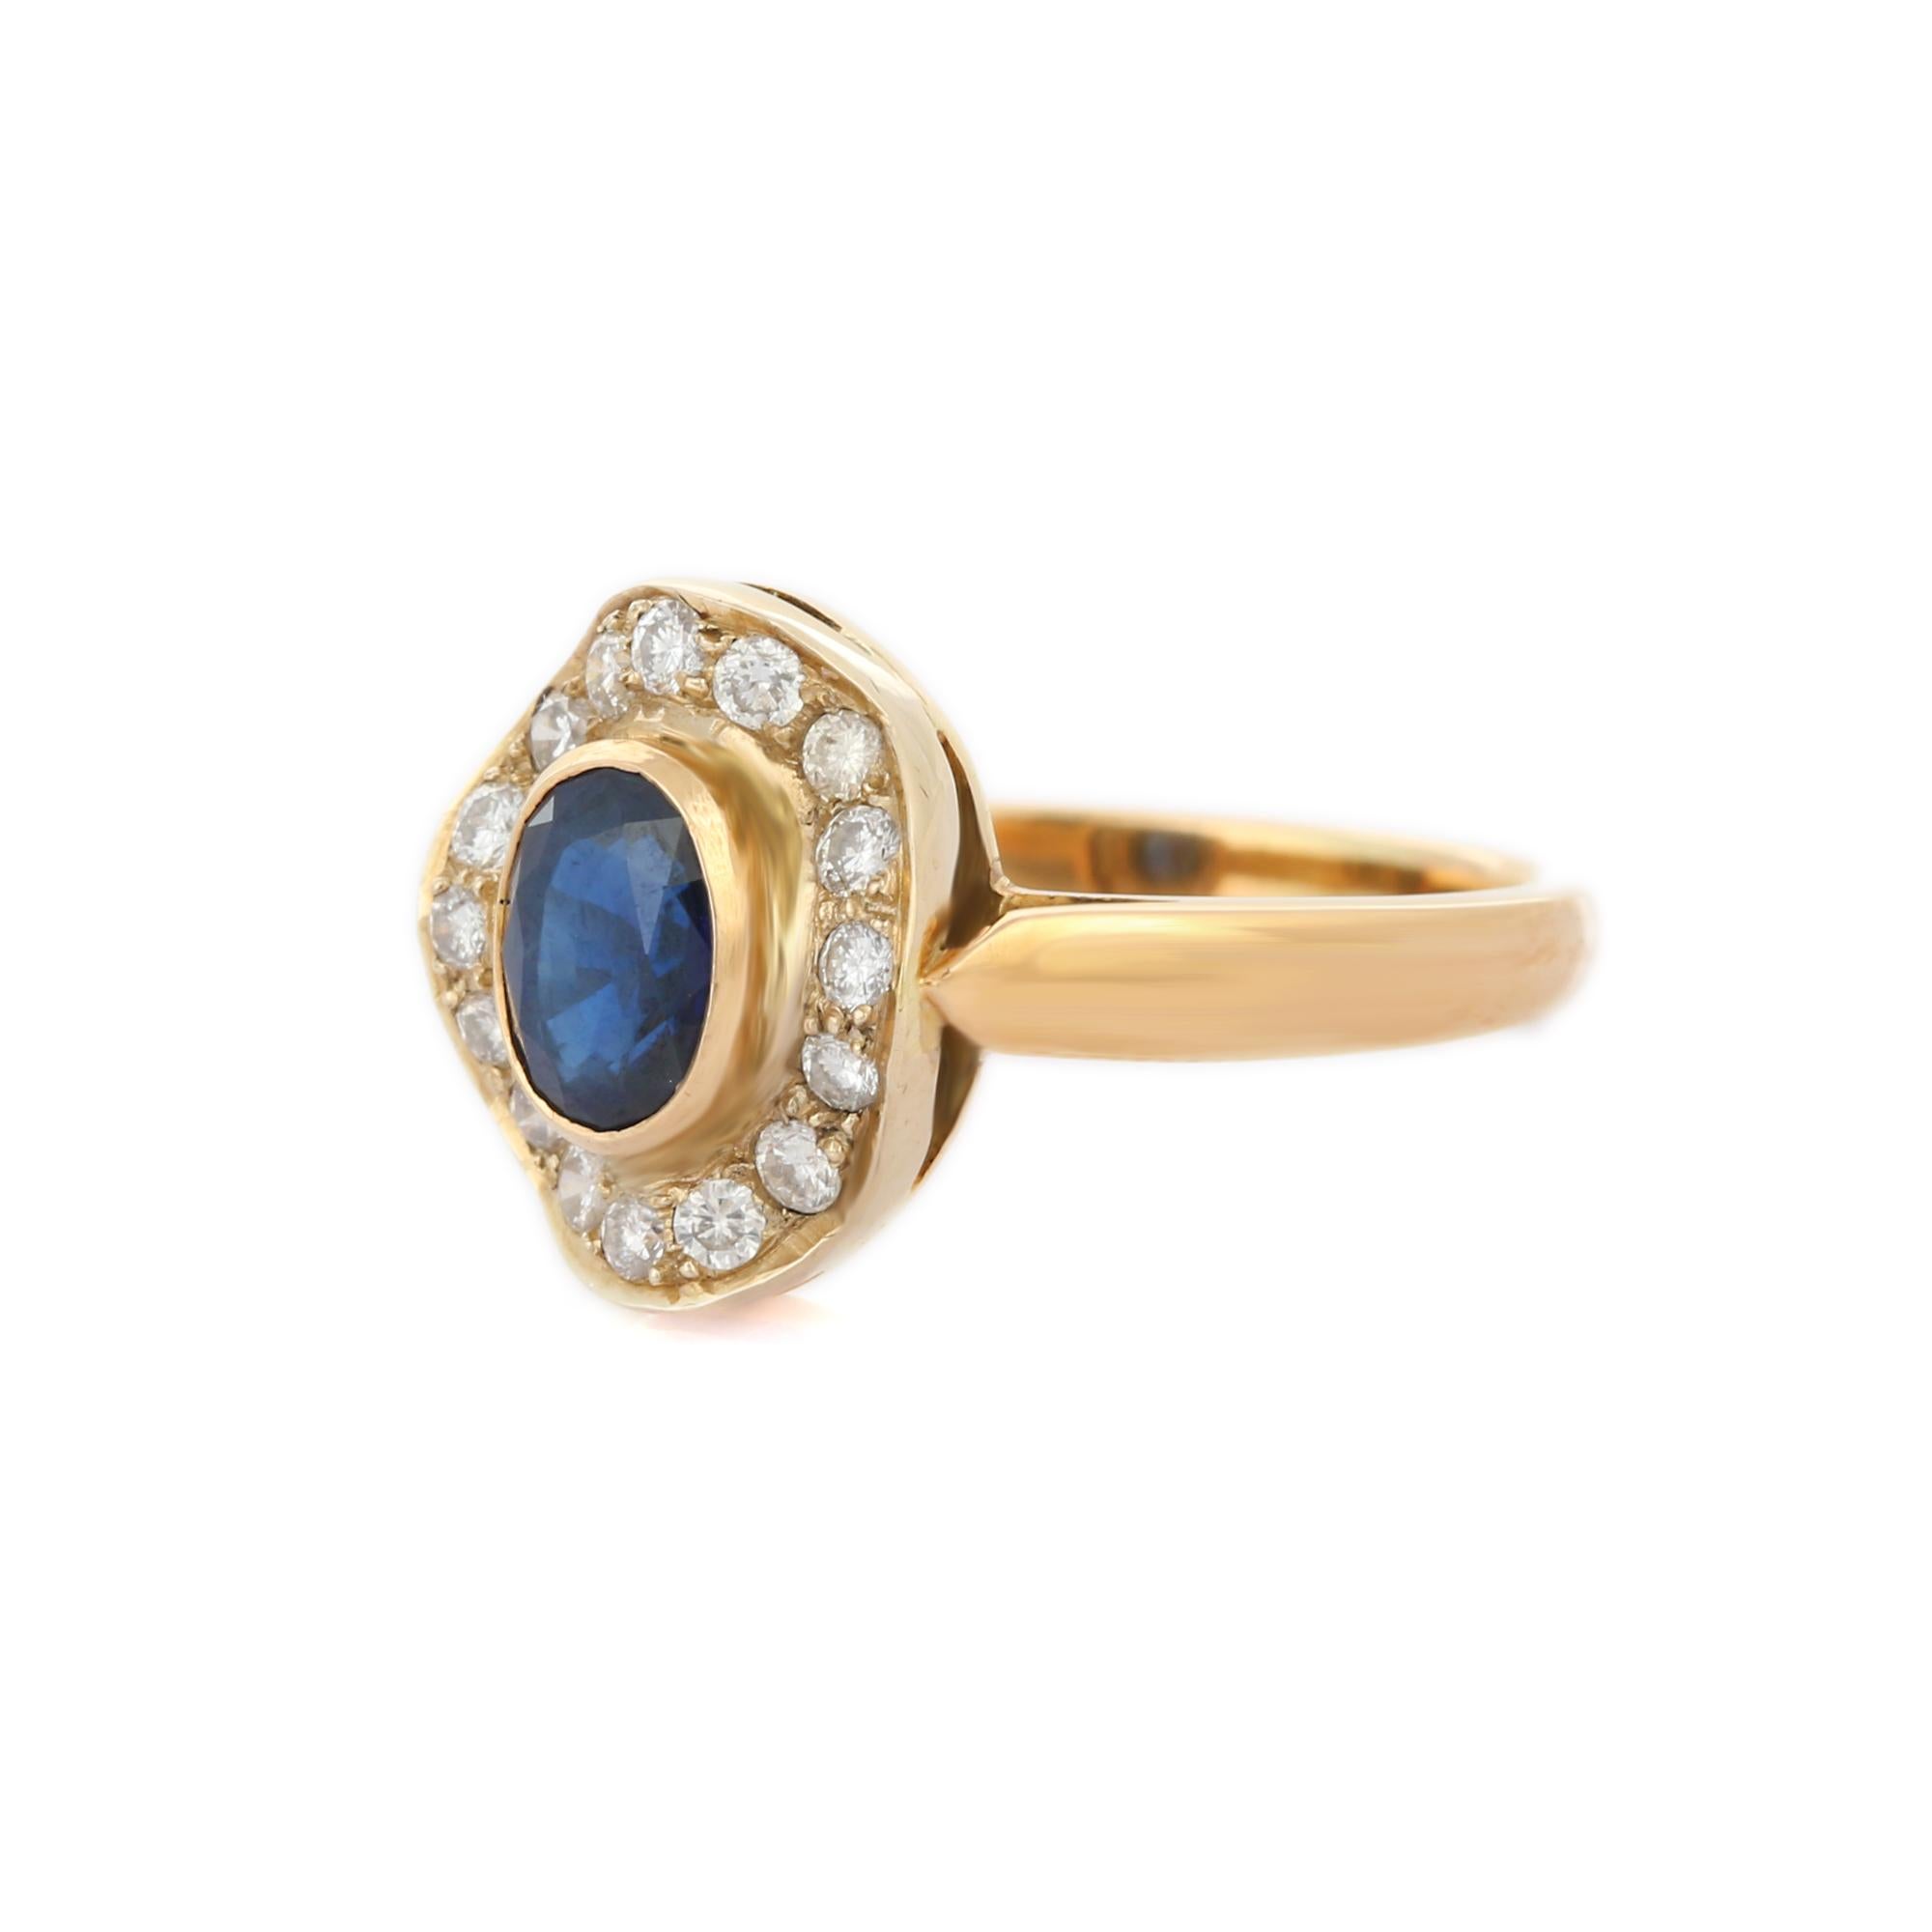 For Sale:  Alluring 18K Solid Yellow Gold Blue Sapphire Diamond Ring, Yellow Gold Ring 3